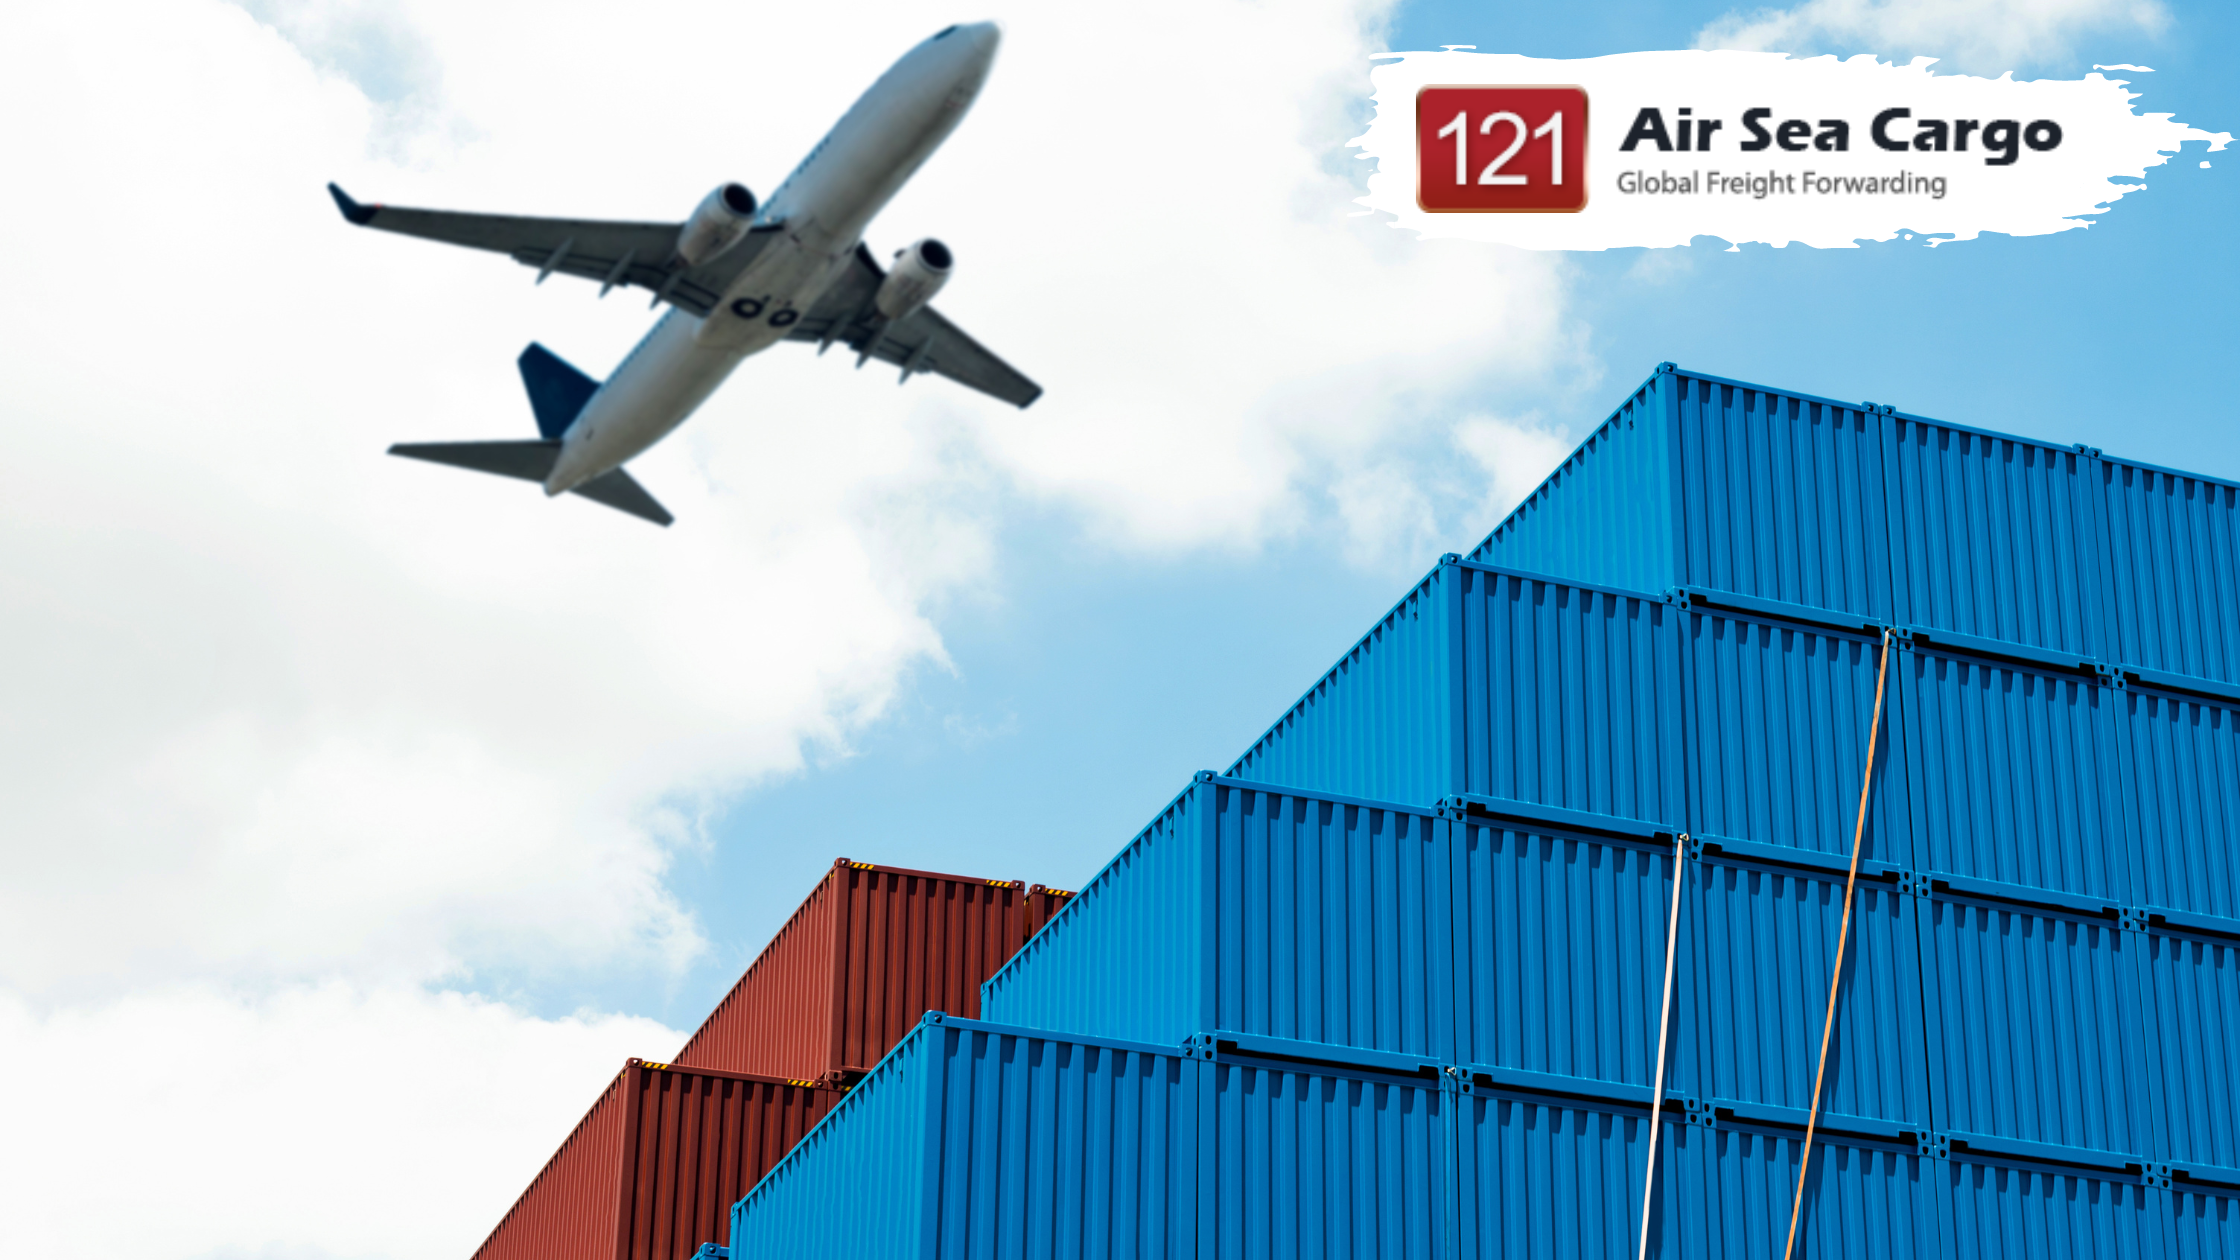 121 Air Sea Cargo Ltd: Elevating Air Cargo Services Between the UK and Dubai